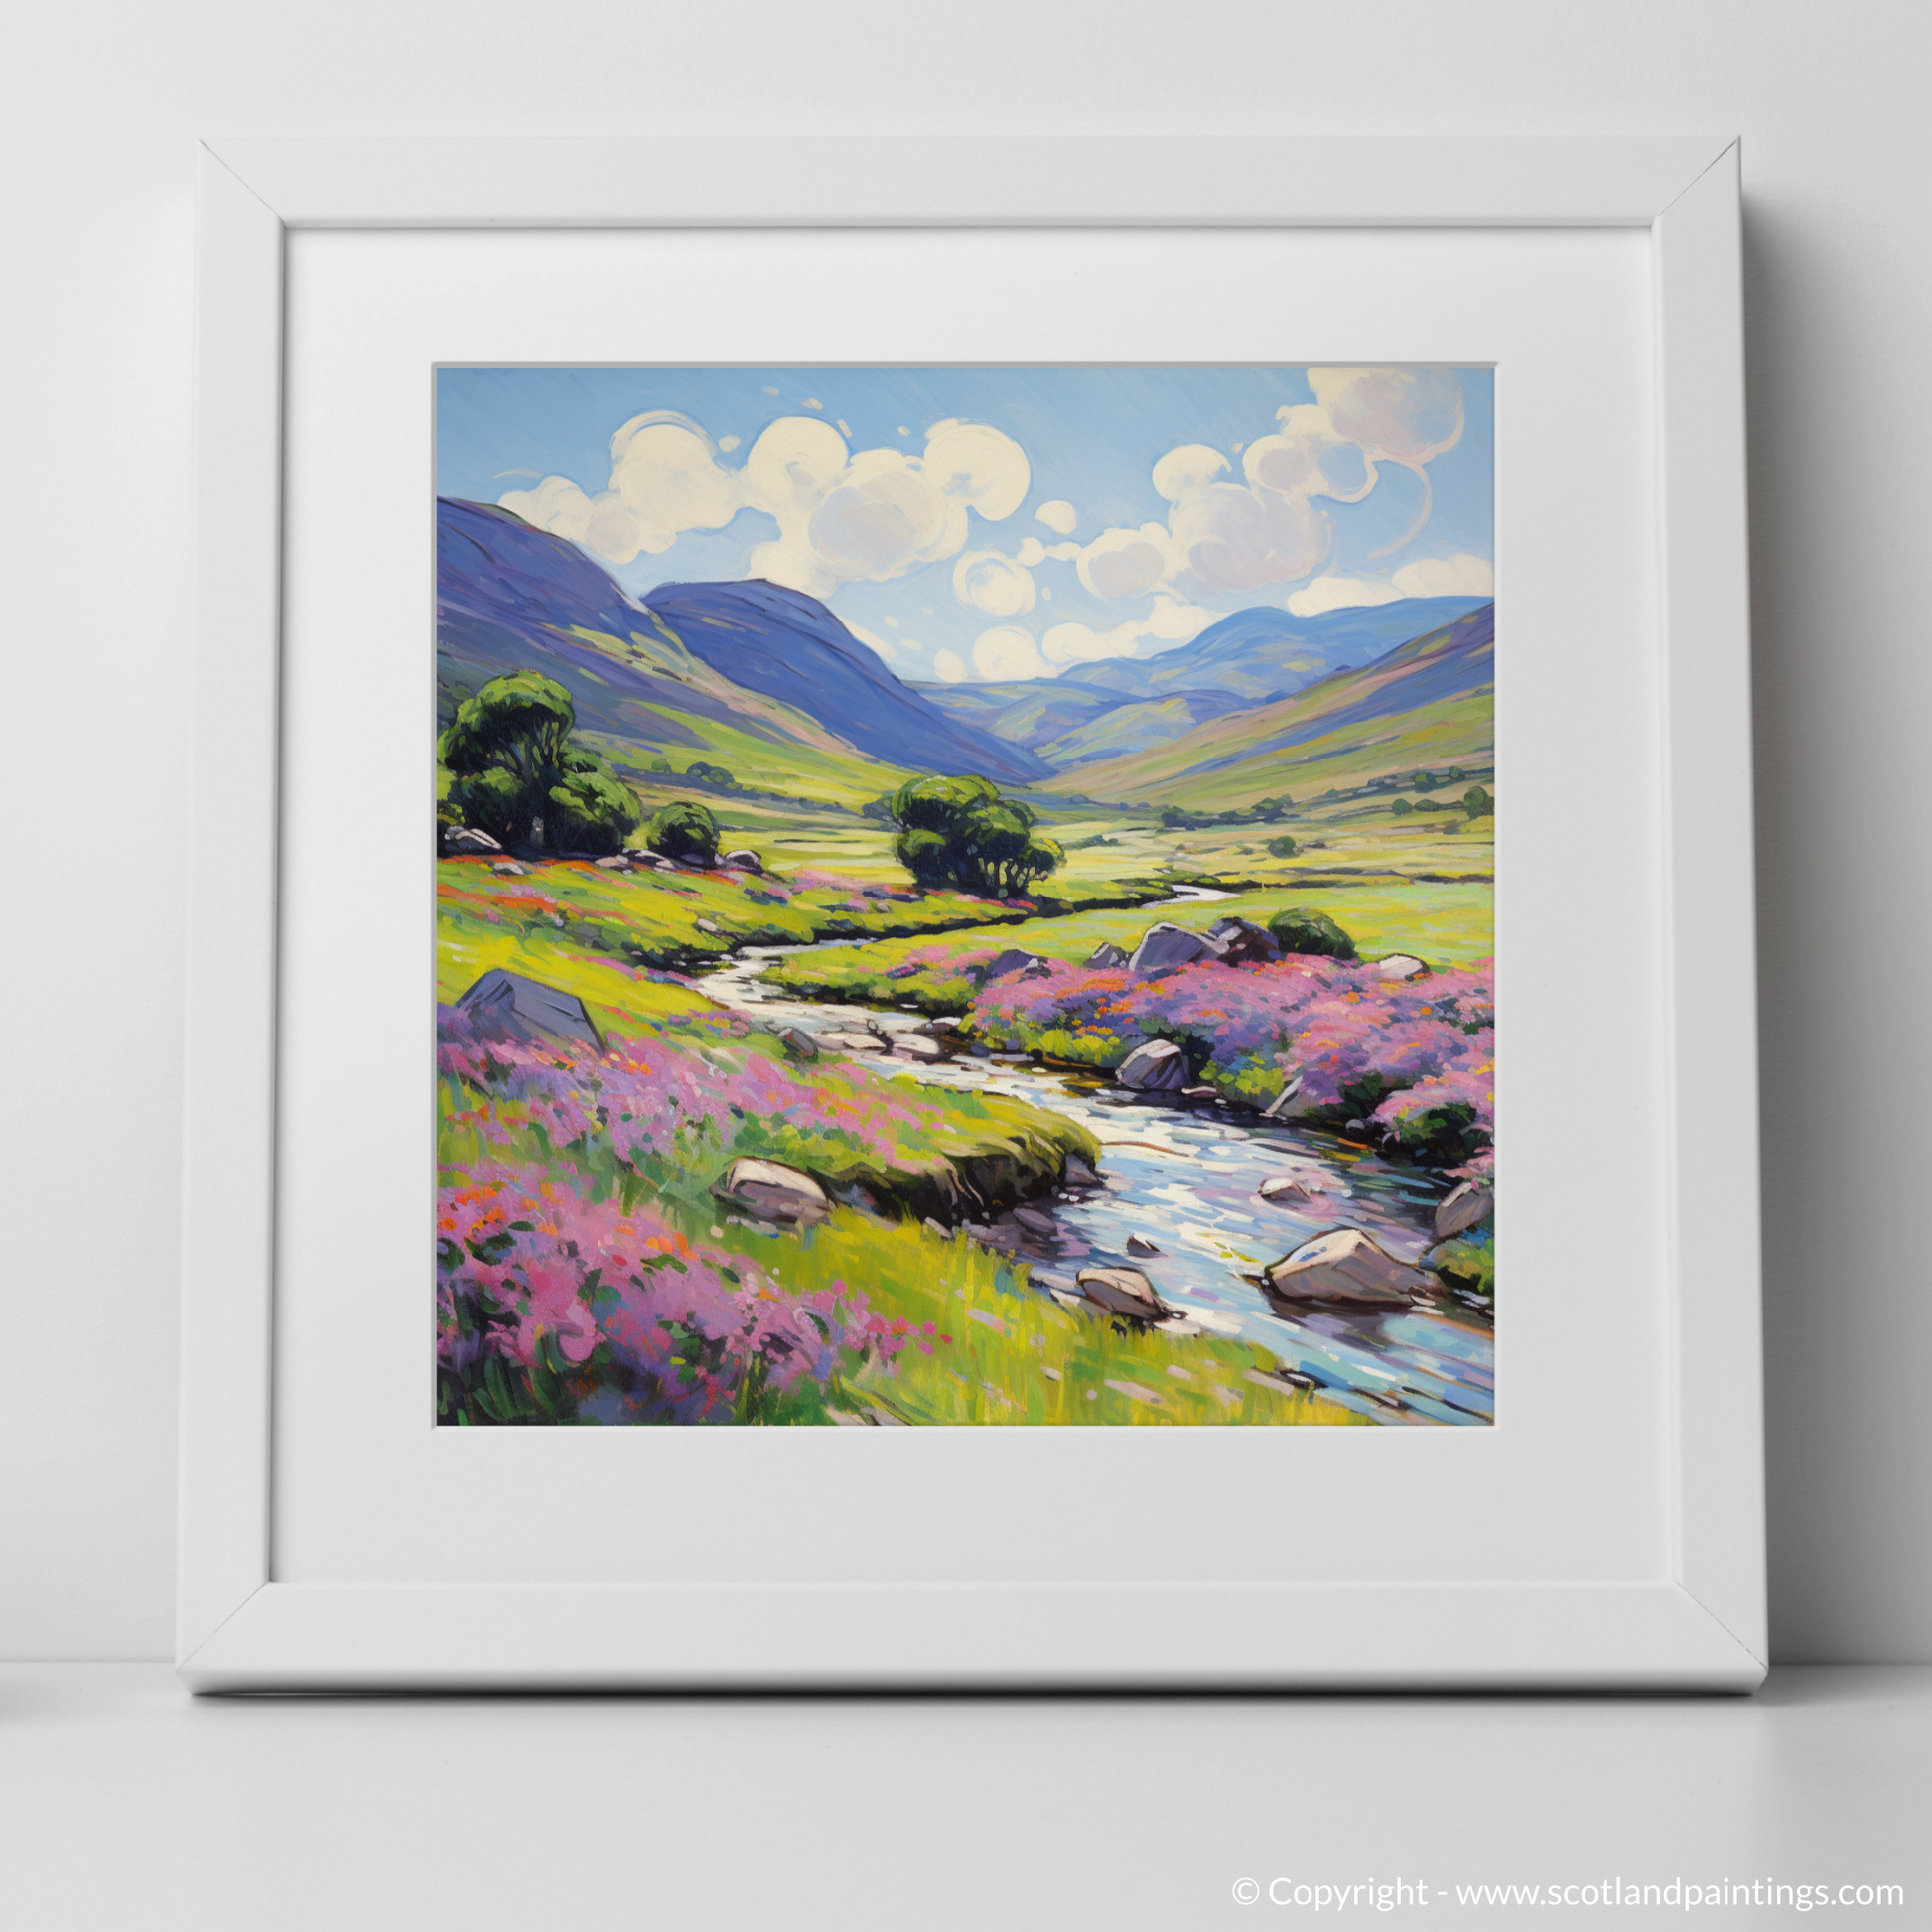 Art Print of Glen Doll, Angus in summer with a white frame